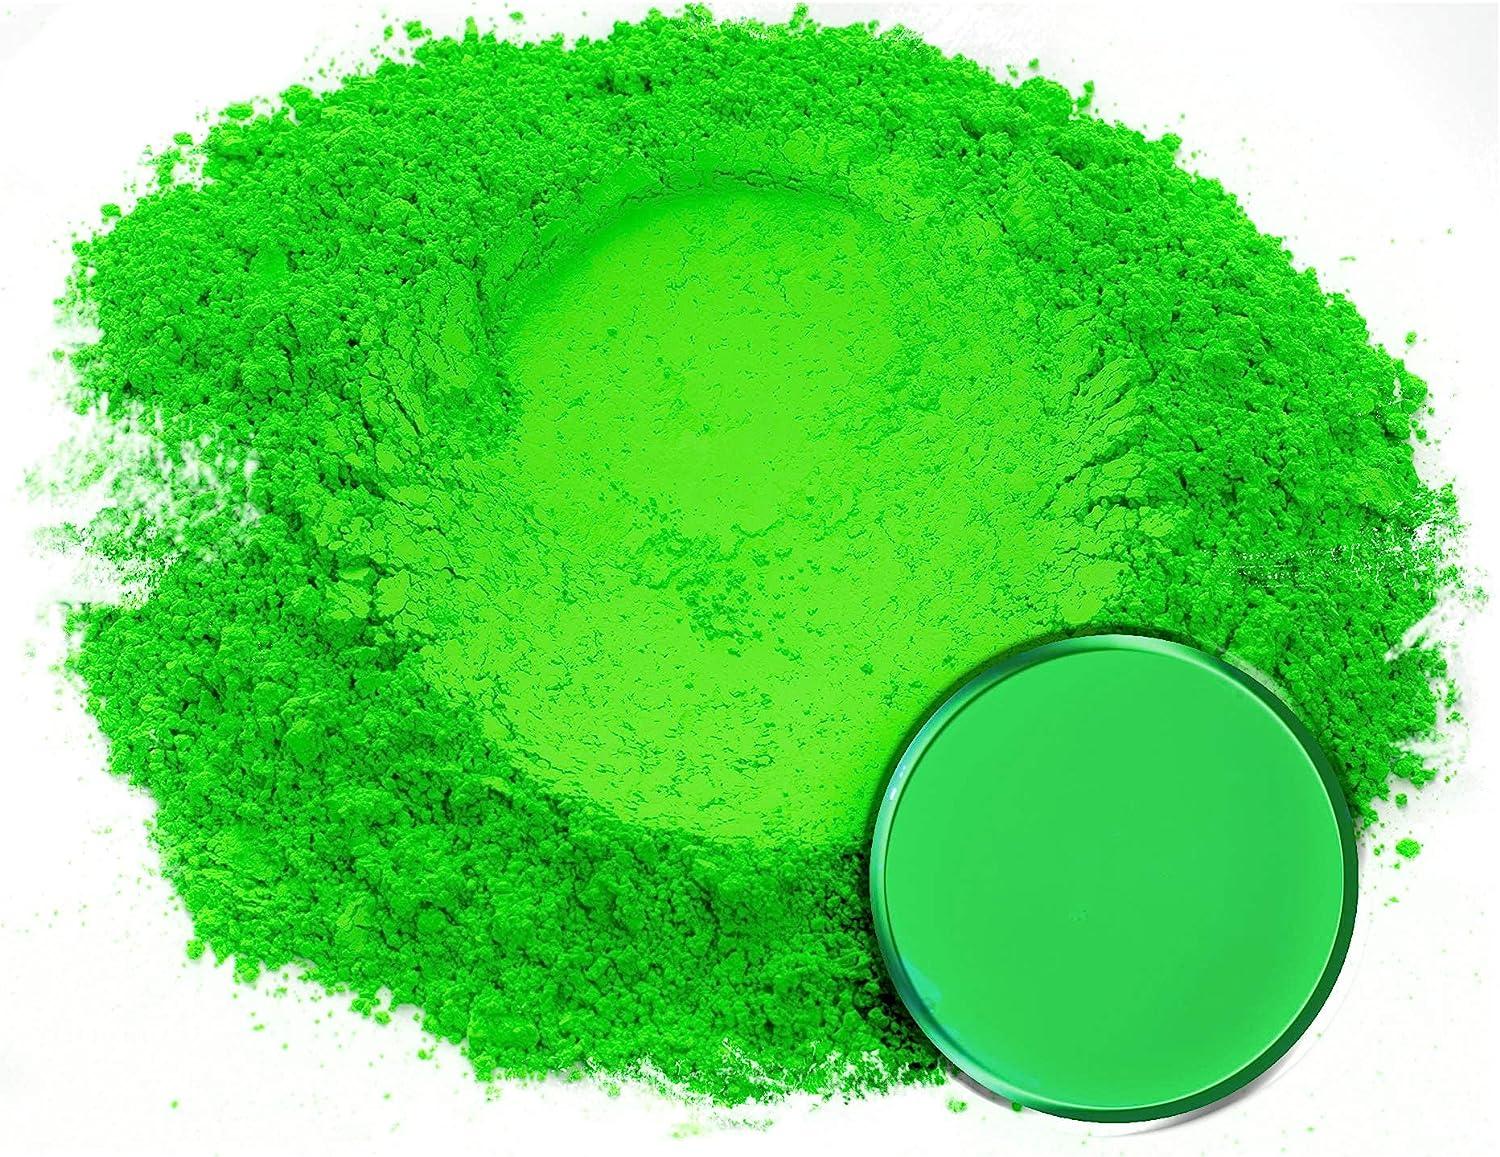 Eye Candy Premium Mica Powder - Neon Pigment, Colorant for Epoxy, Resin,  Woodworking, Soap Molds, Candle Making, Slime, Bath Bombs, Nail Polish,  Cosmetic Grade, Non-Toxic (UFO Green, 50 Grams) UFO Green 50 Grams